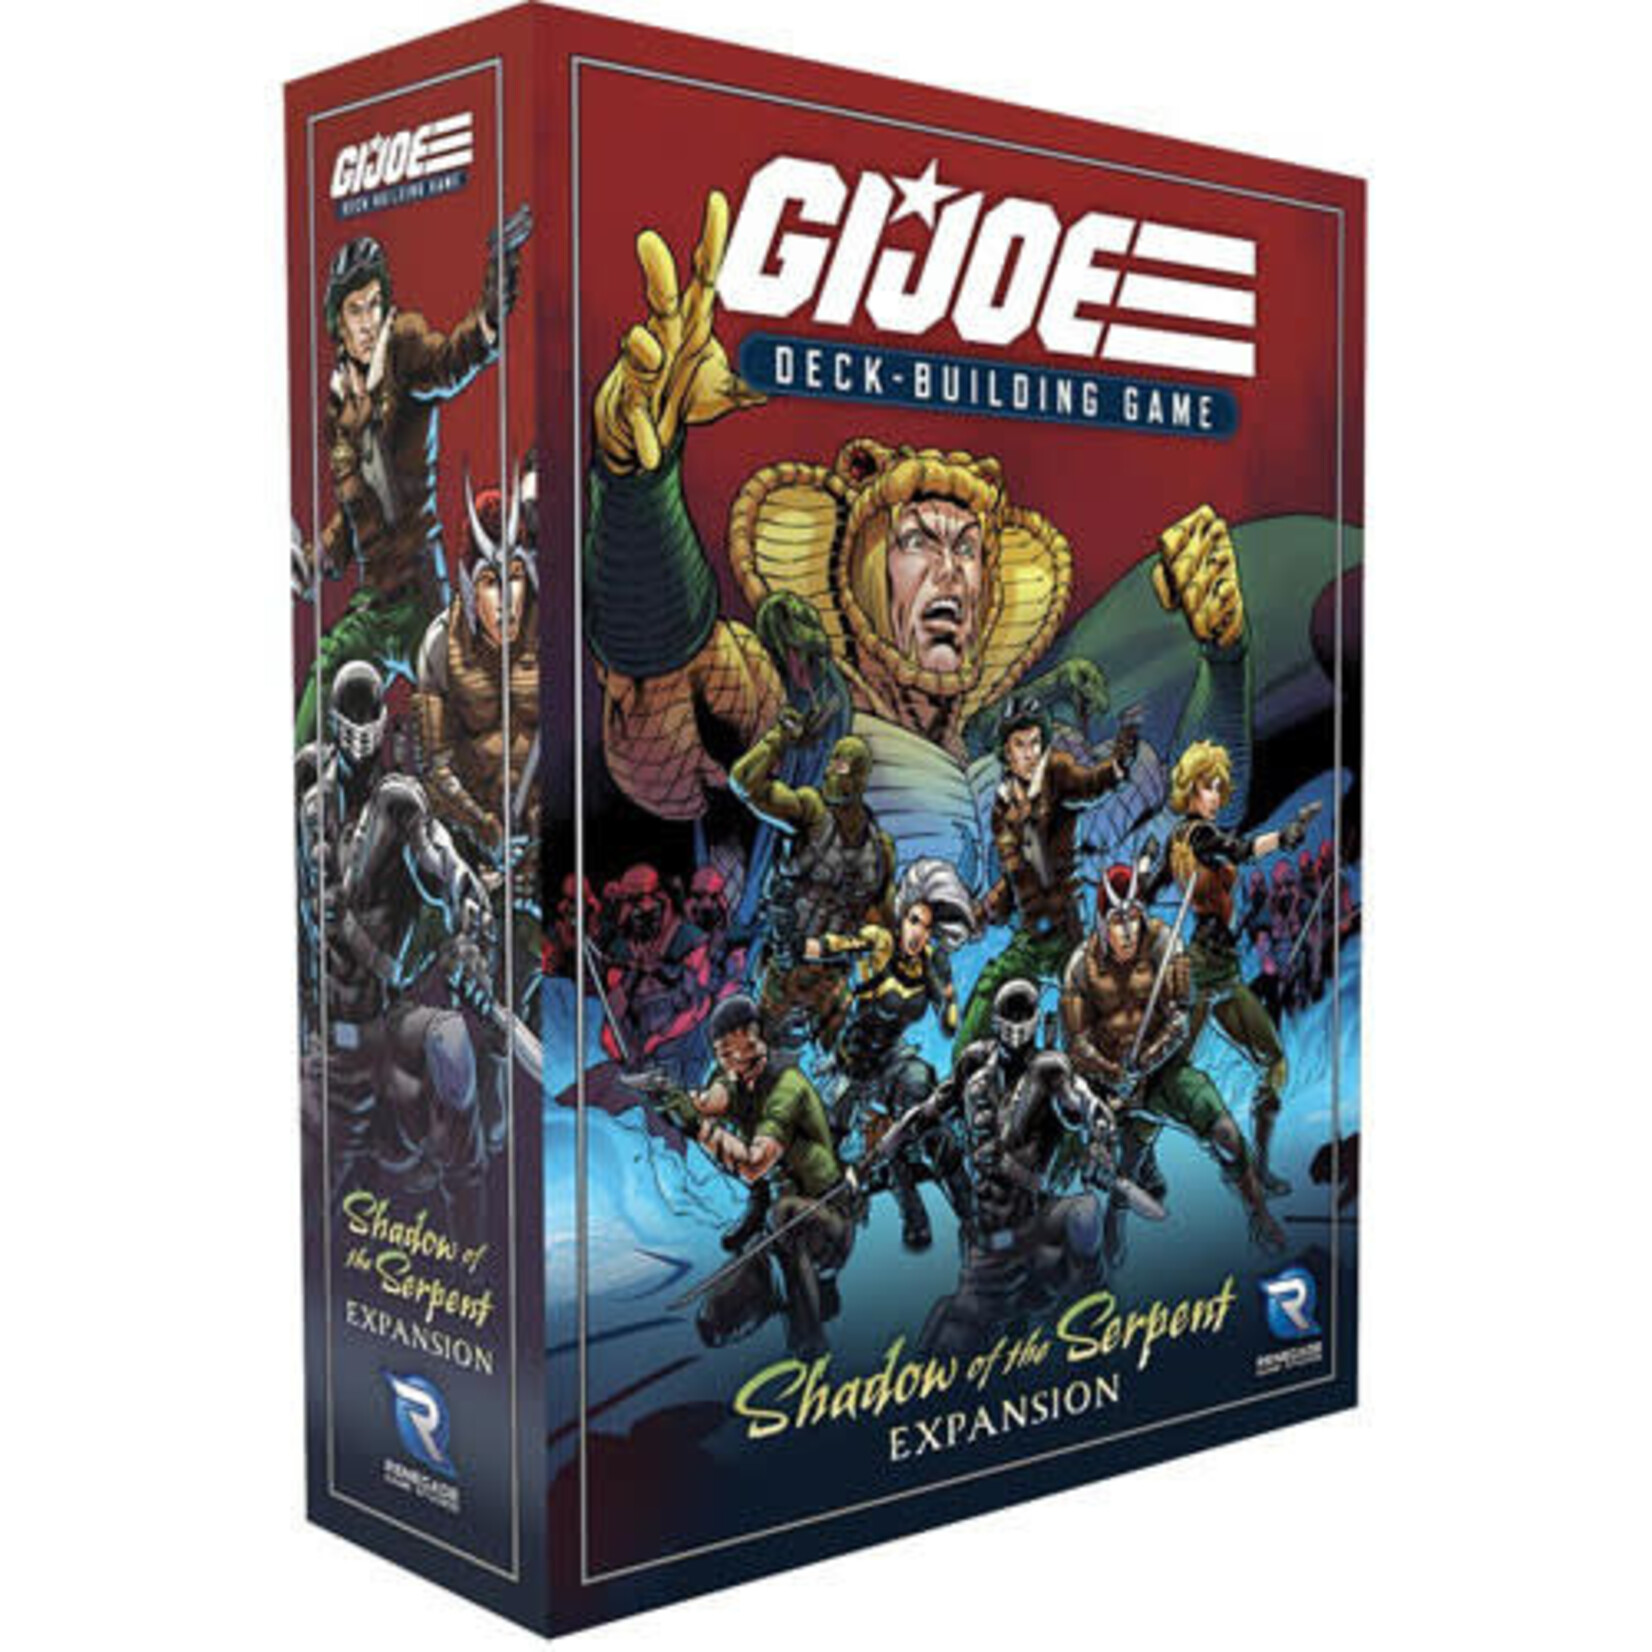 Renegade Game Studios G.I. JOE: Deck-Building Game - Shadow of the Serpent Expansion